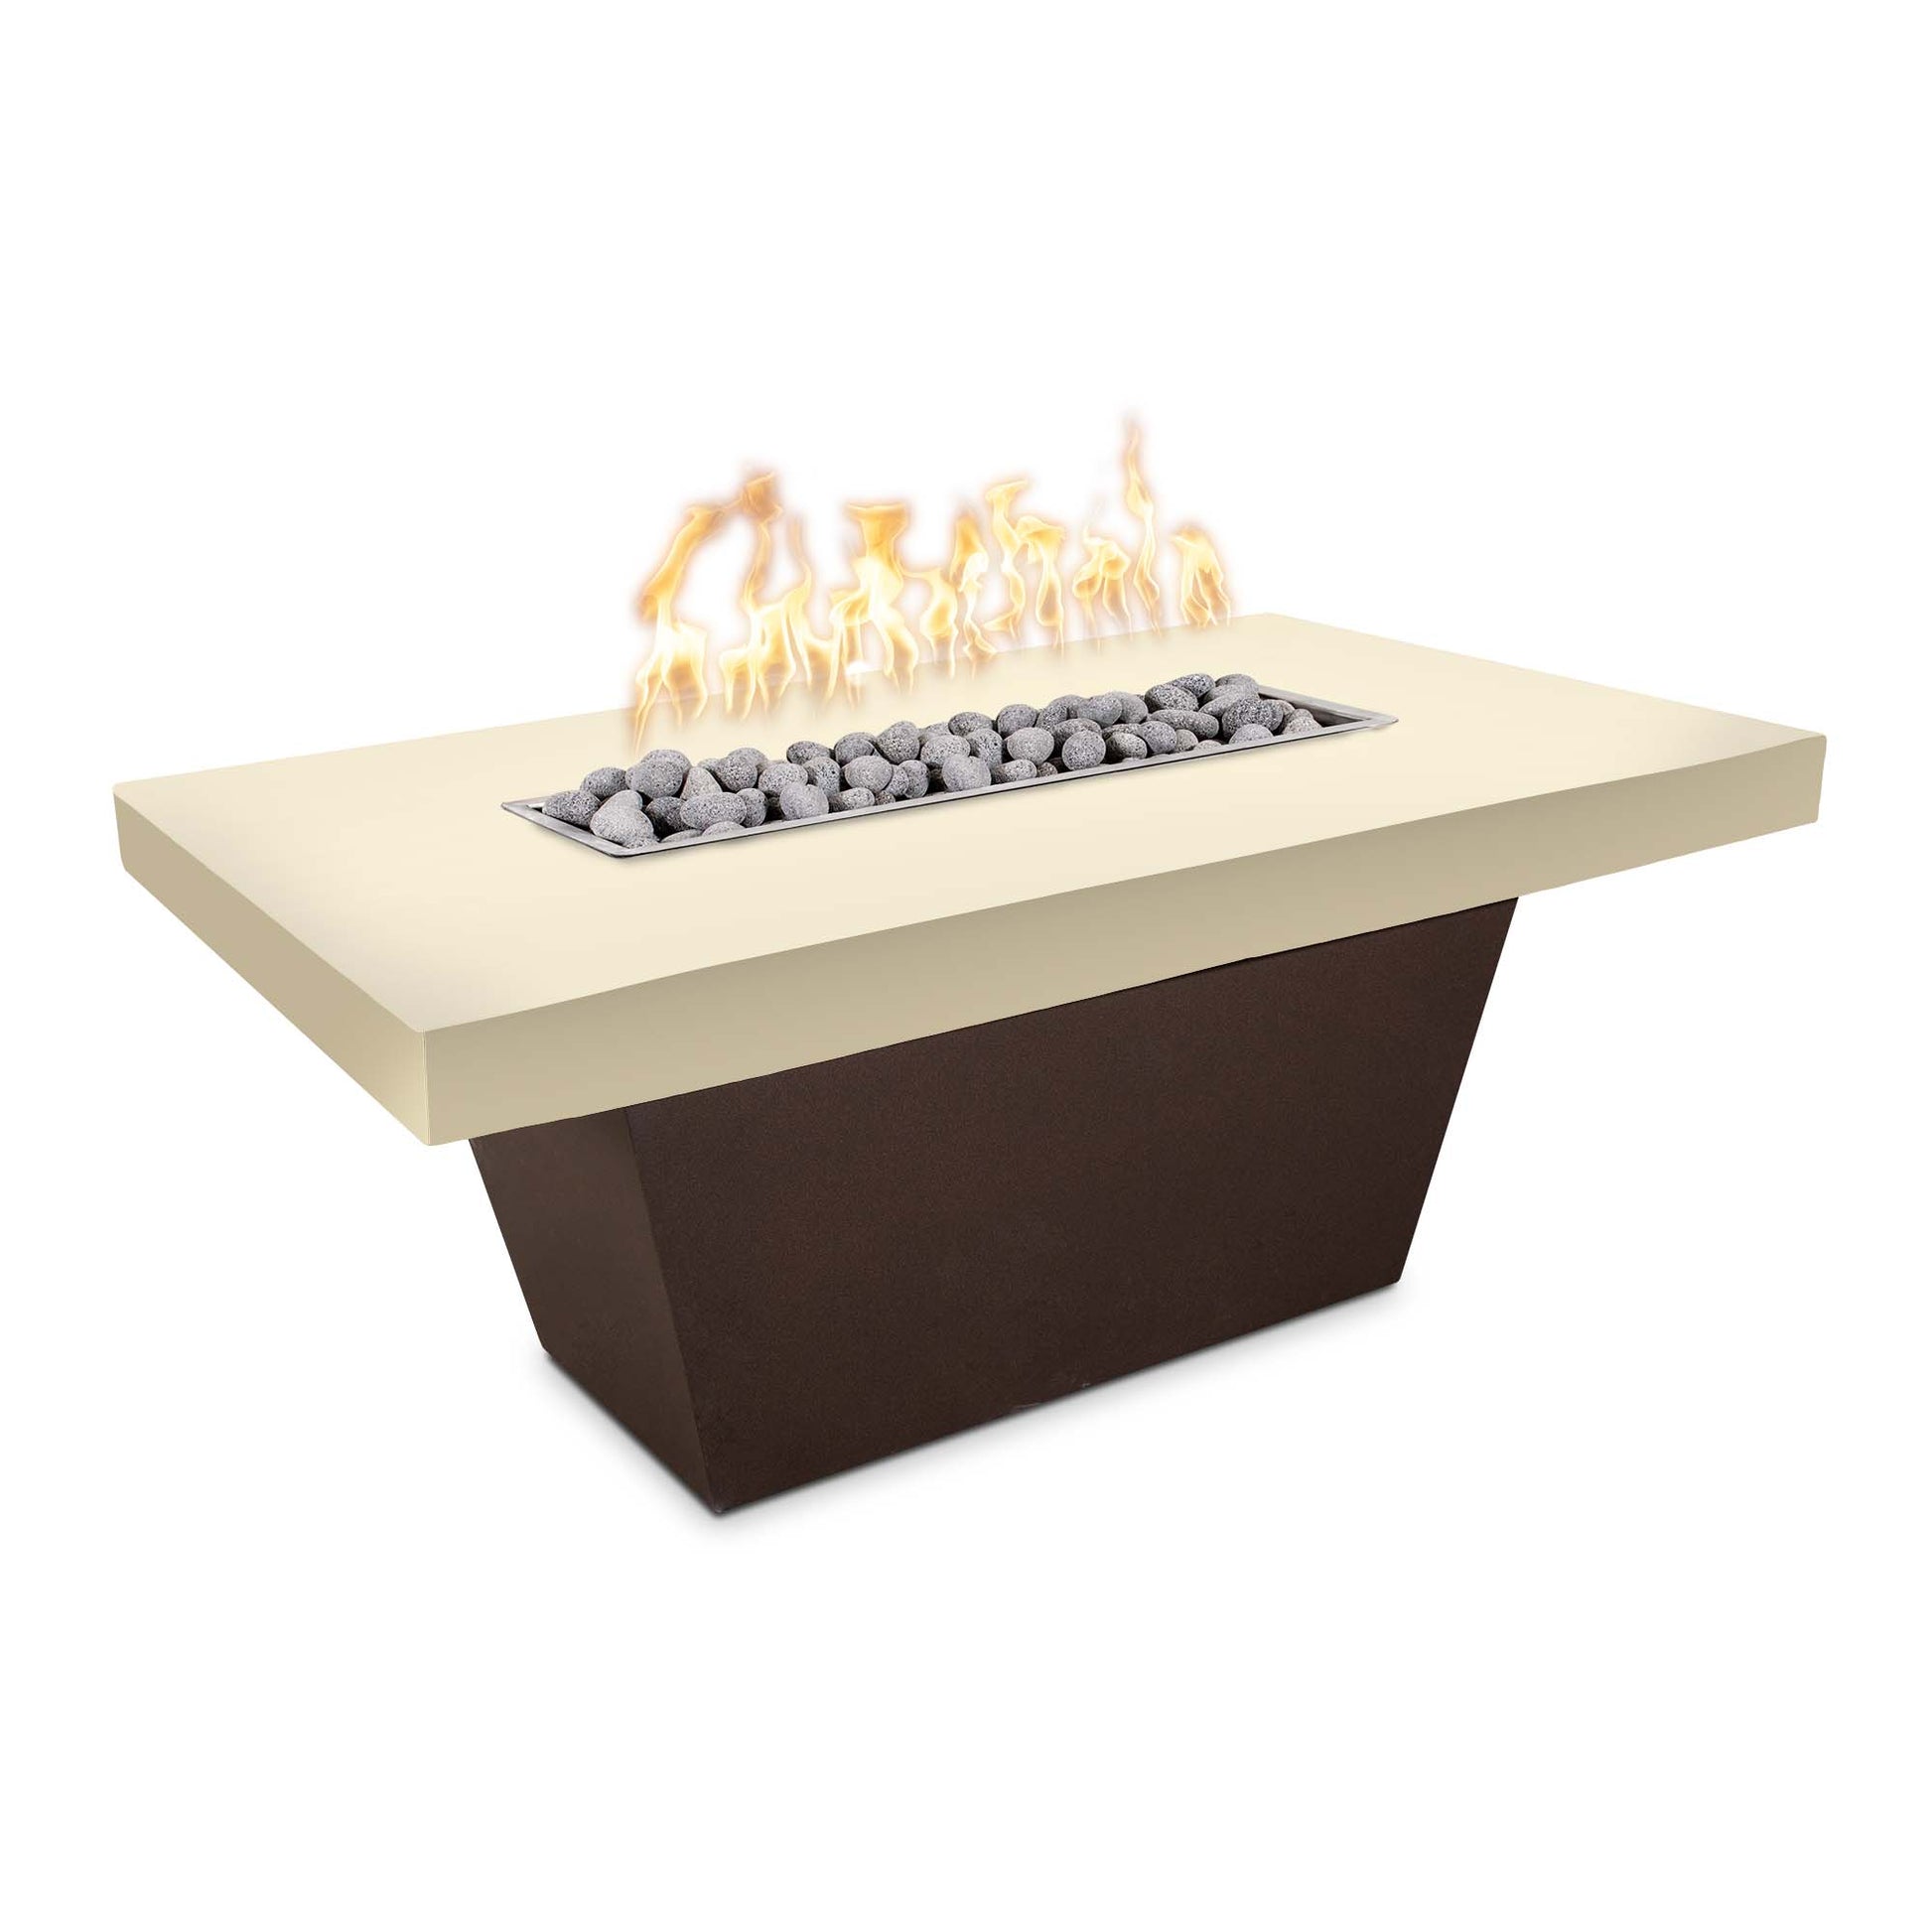 The Outdoor Plus Tacoma 48" Rustic White Concrete Top & White Powder Coated Base Natural Gas Fire Table with Match Lit Ignition